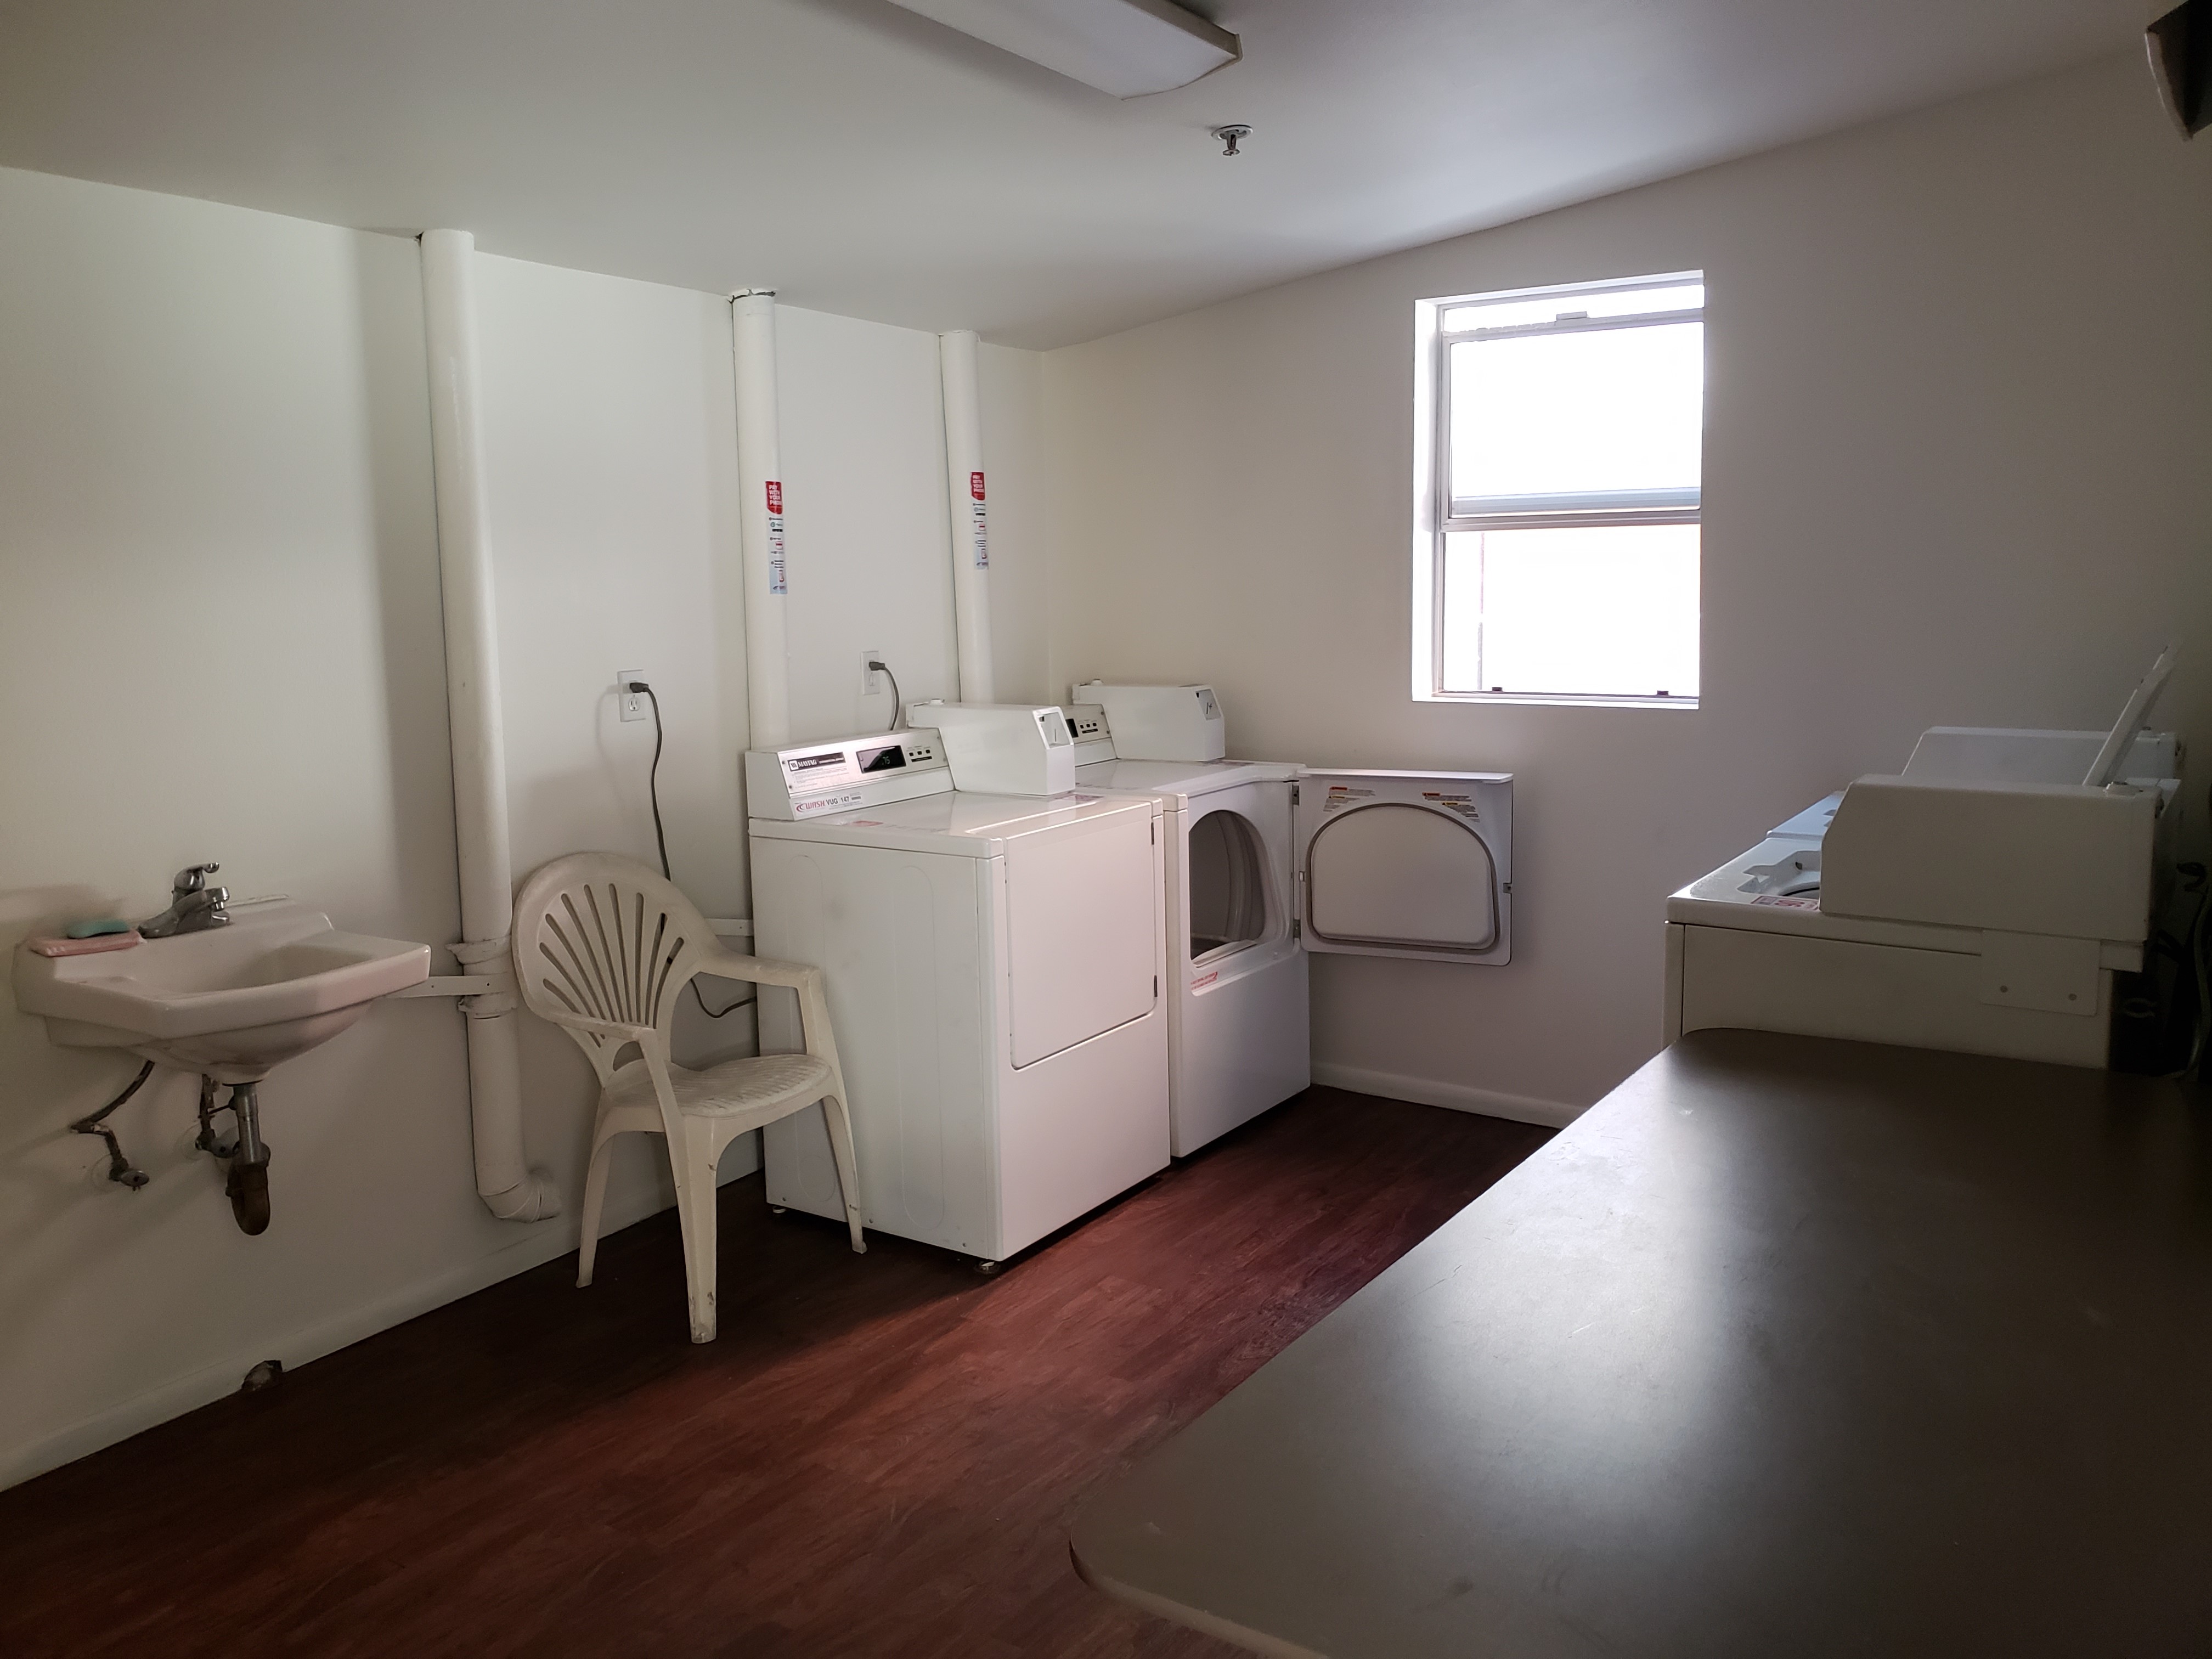 Inside view of a laundry room. Room consists of a sink, 4 machines, a table and a chair. There is also a small window.